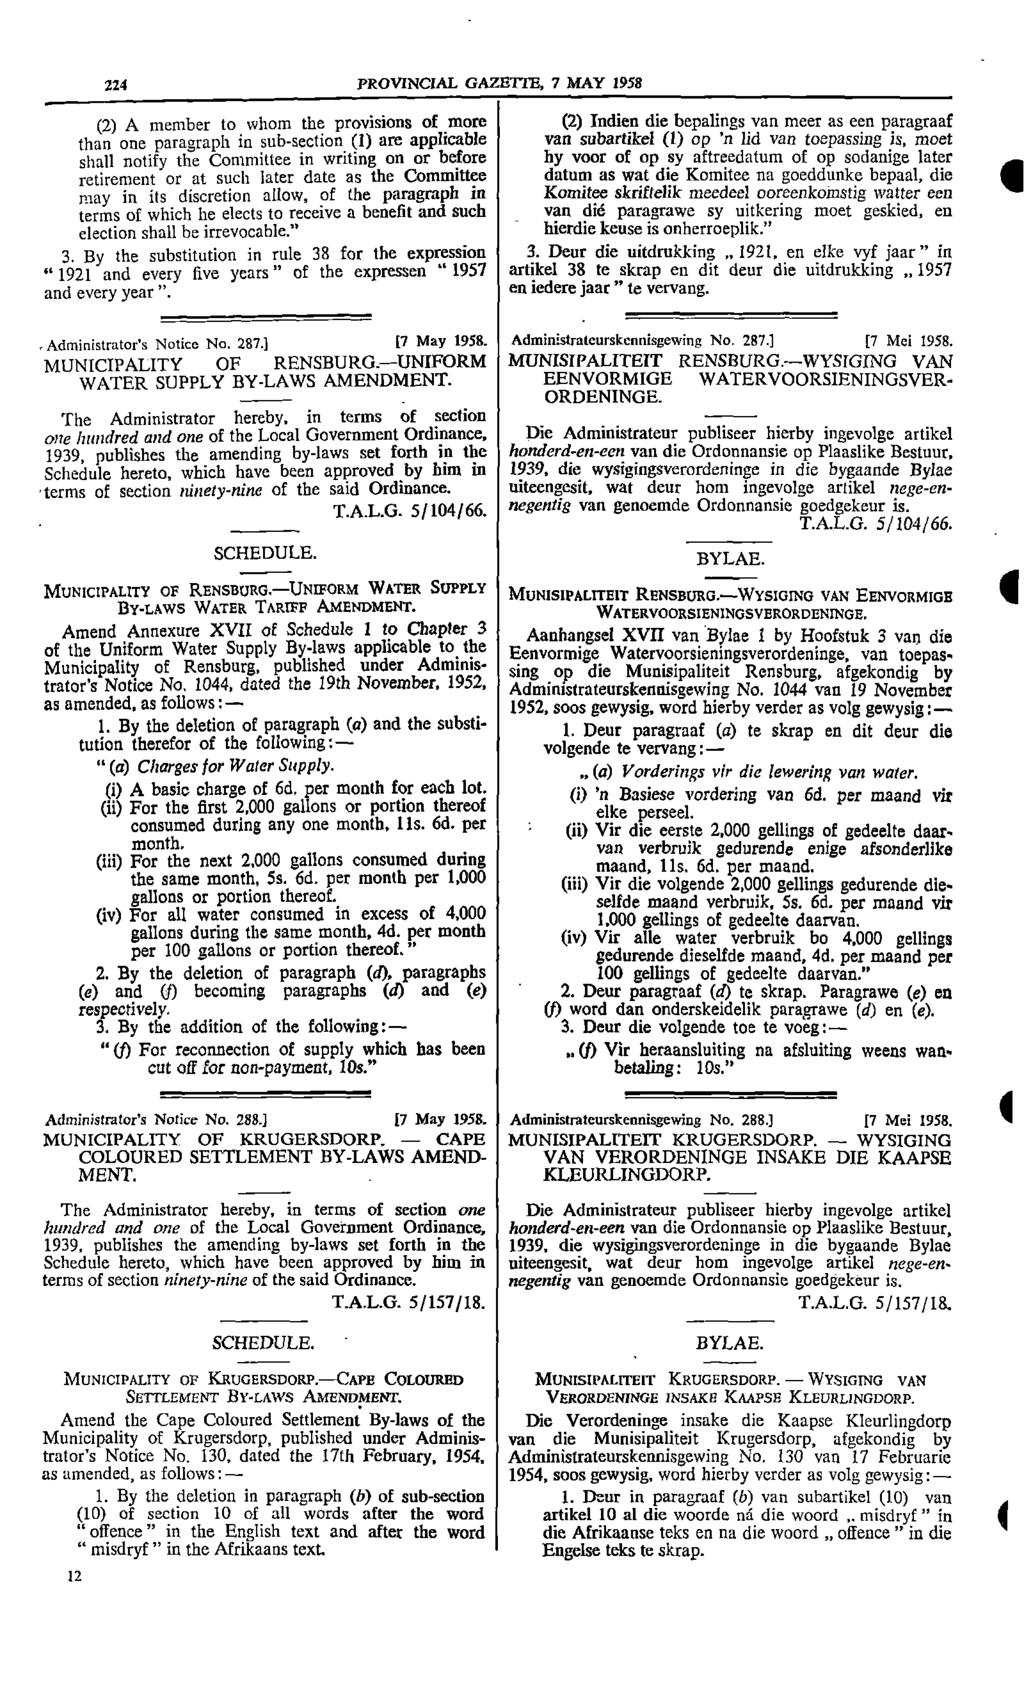 22 PROVNCAL GAZElla 7 MAY 1958 (2) A member to whom the provisions of more (2) nclien die bepalings van meet as een paragraaf than one paragraph in subsection (1) are applicable van subartikel (1) op